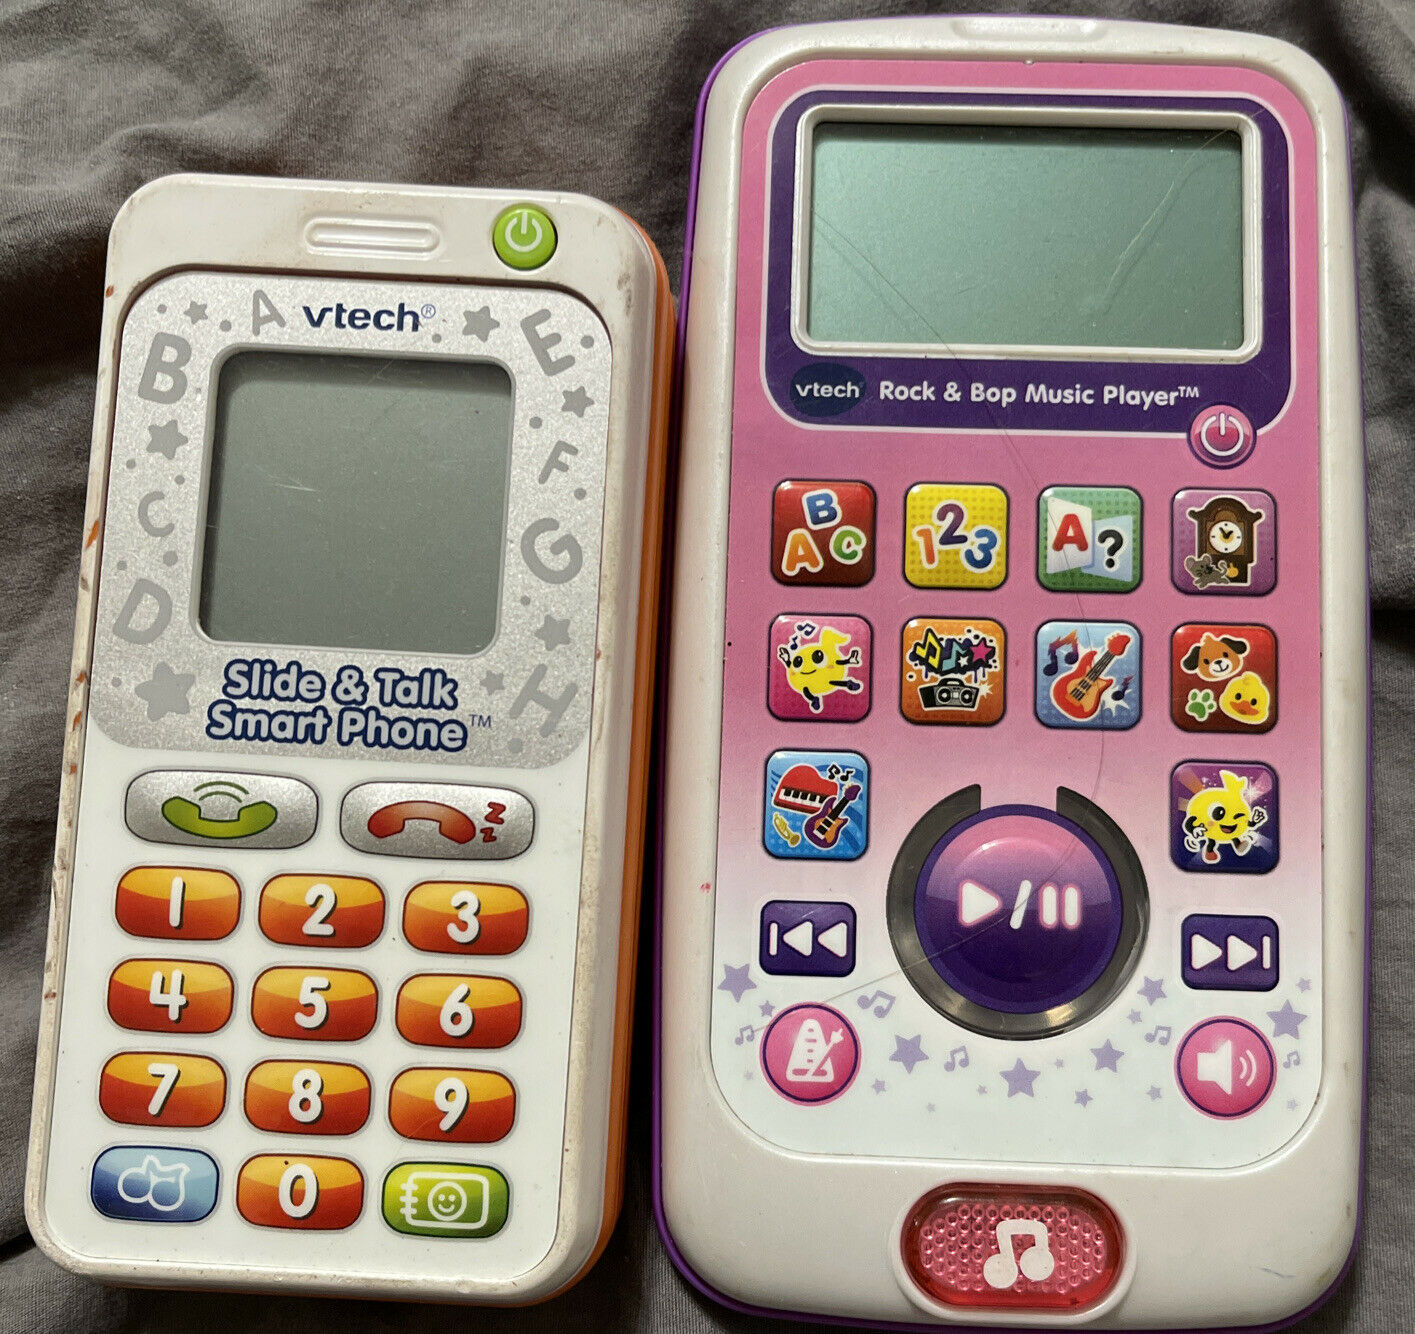 Vtech Baby's Learning Laptop! Educational Computer Toy pink purple  TESTED WORKS